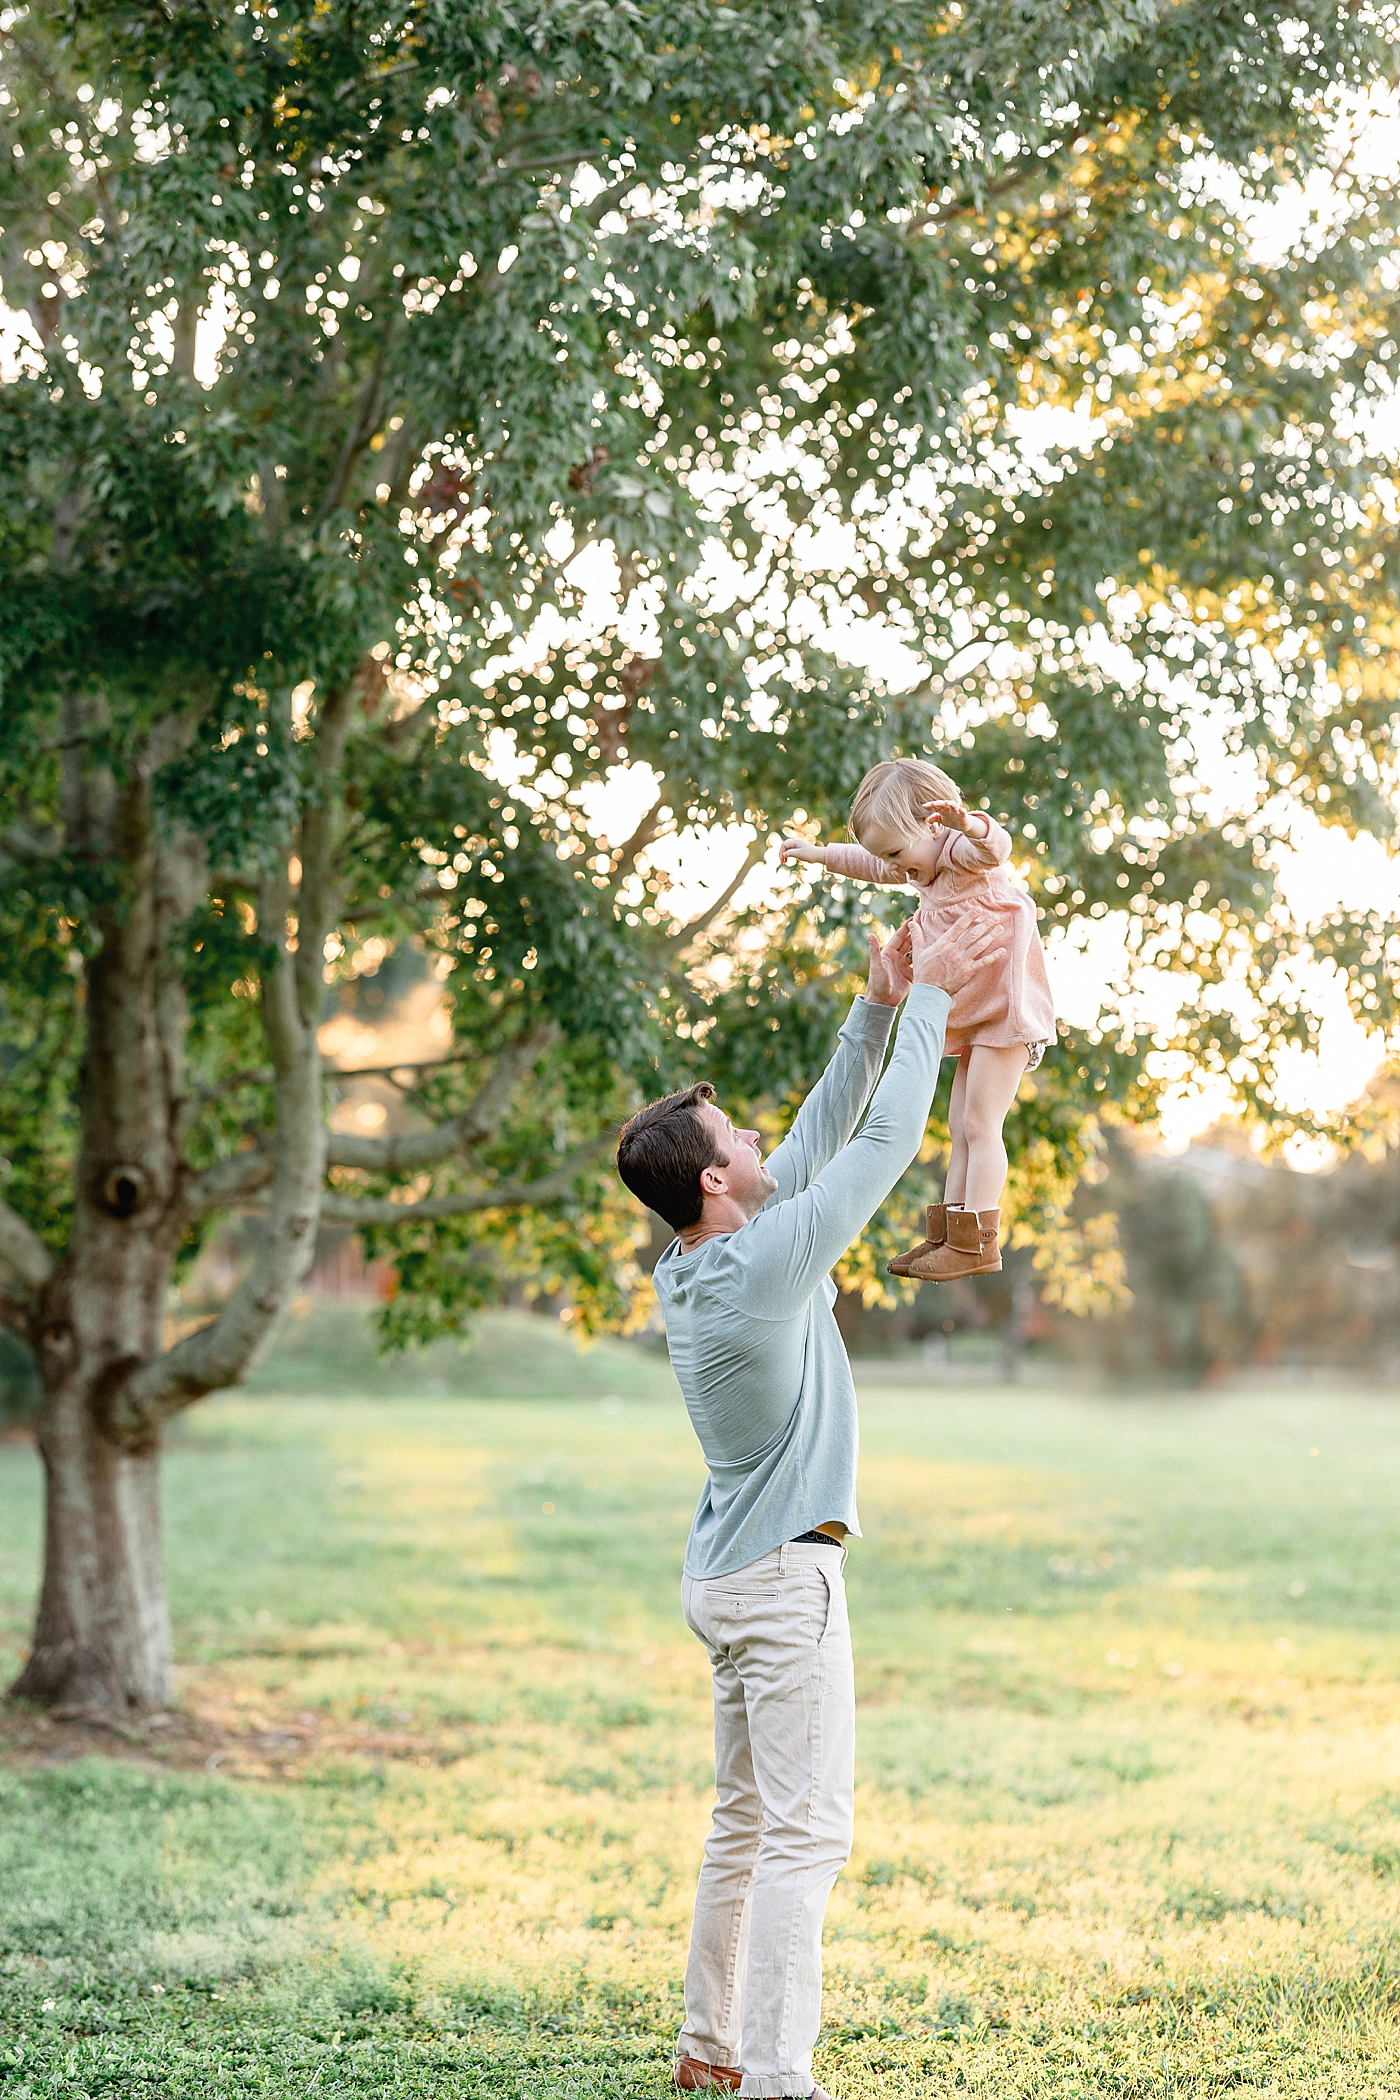 Dad throwing two year old daughter up in the air. Photo by Brittany Elise Photography.